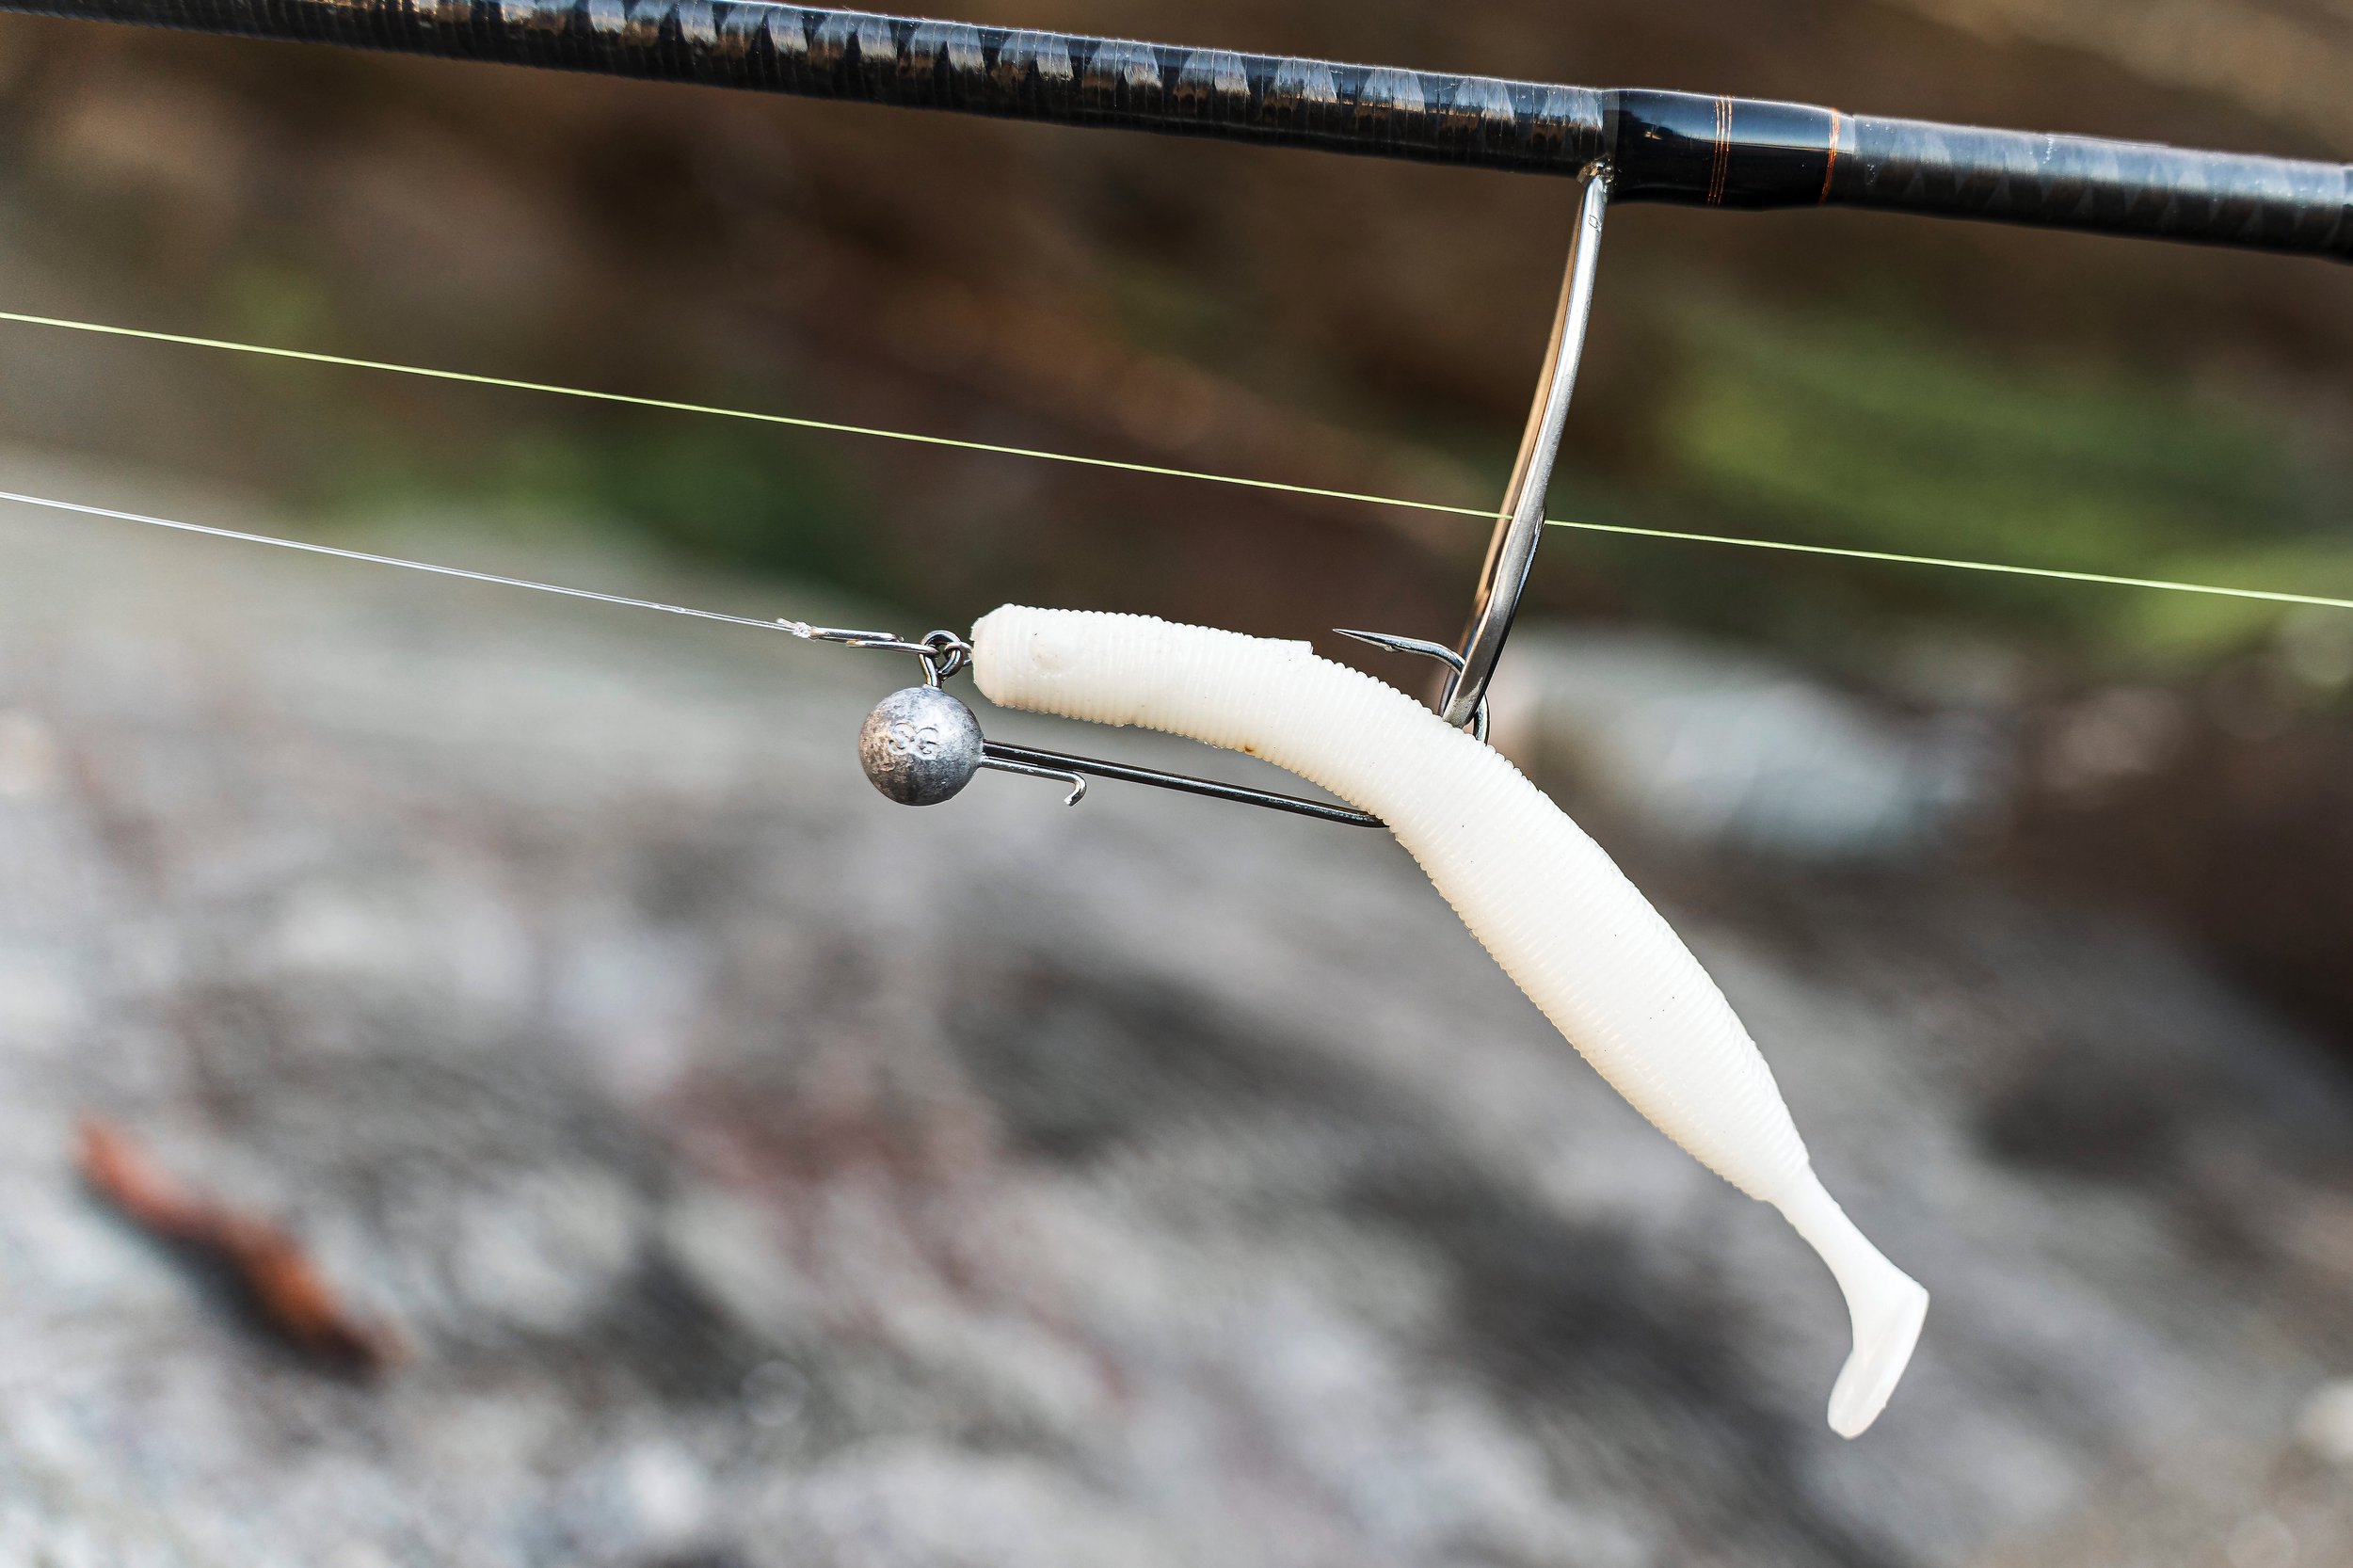 Casts well, swims well, bumps well, but is this style of rigging going to  effectively hook fish? — Henry Gilbey